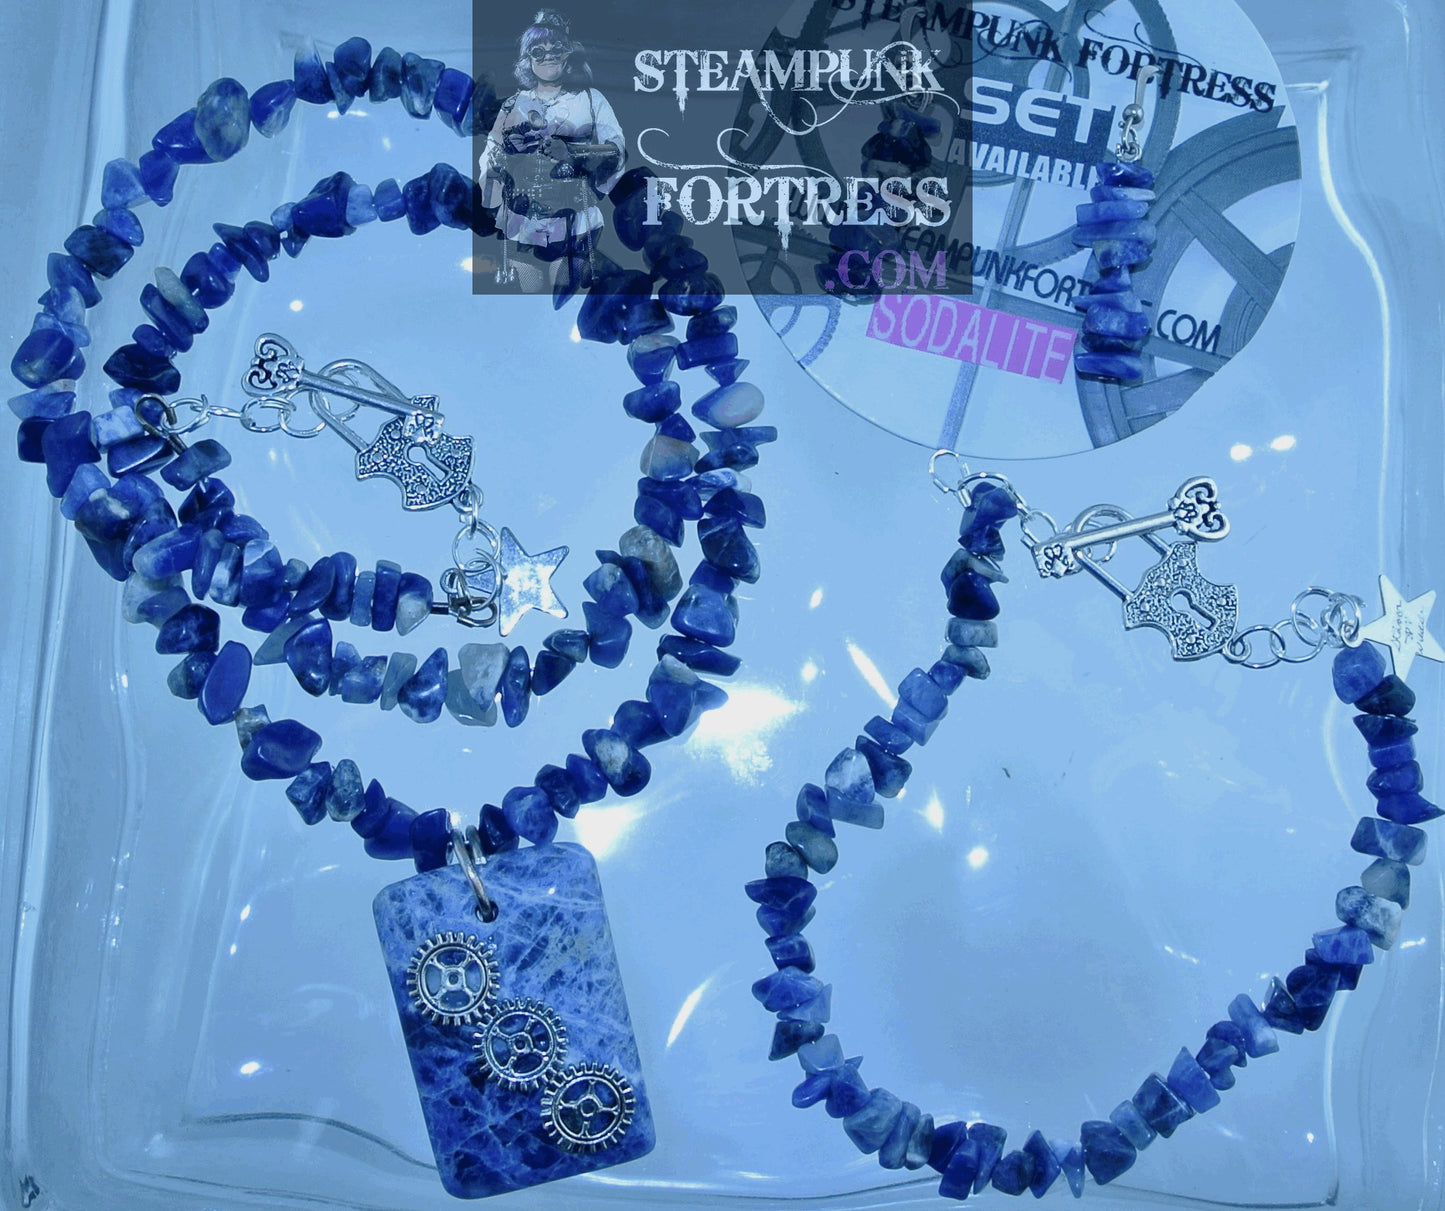 SILVER SODALITE RECTANGLE GEMSTONES STONES FOCAL 3 SILVER 4 ARM GEARS CHIPS NECKLACE SET AVAILABLE 2 SIDED REVERSIBLE STARR WILDE STEAMPUNK FORTRESS